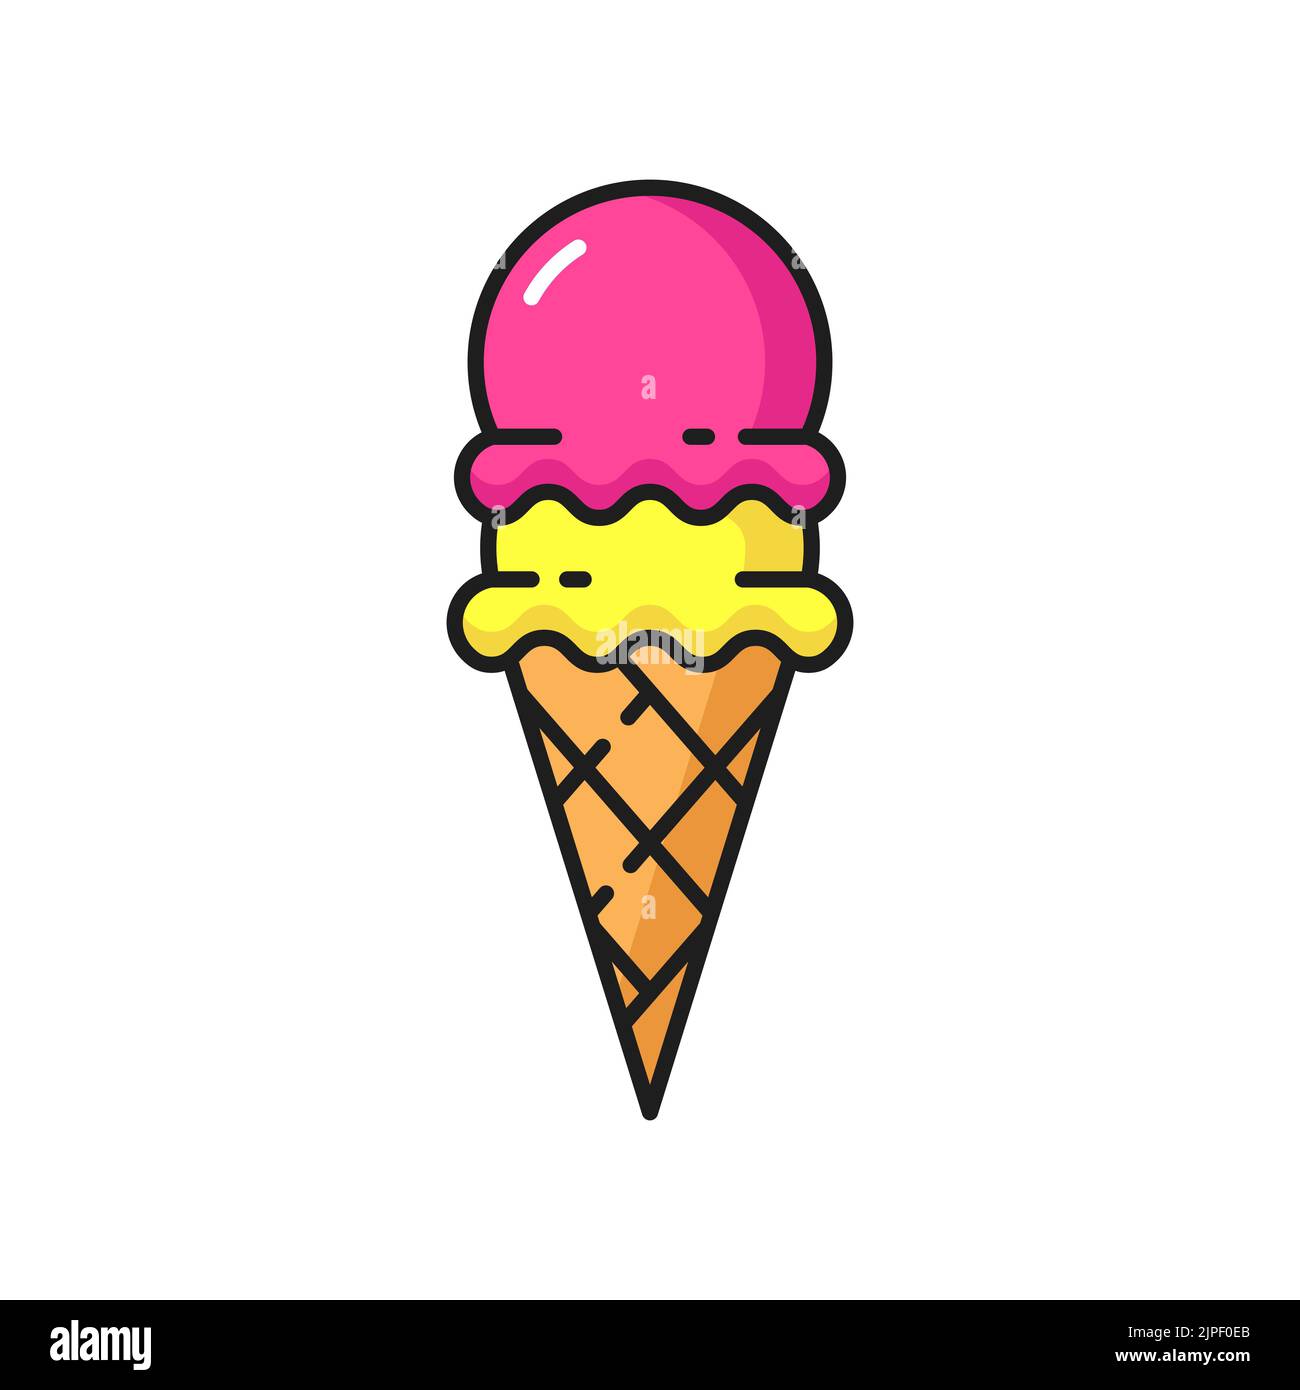 Ice Cream Scoop and Cone Clipart {Colorful and Cute} Borders, banners,  images